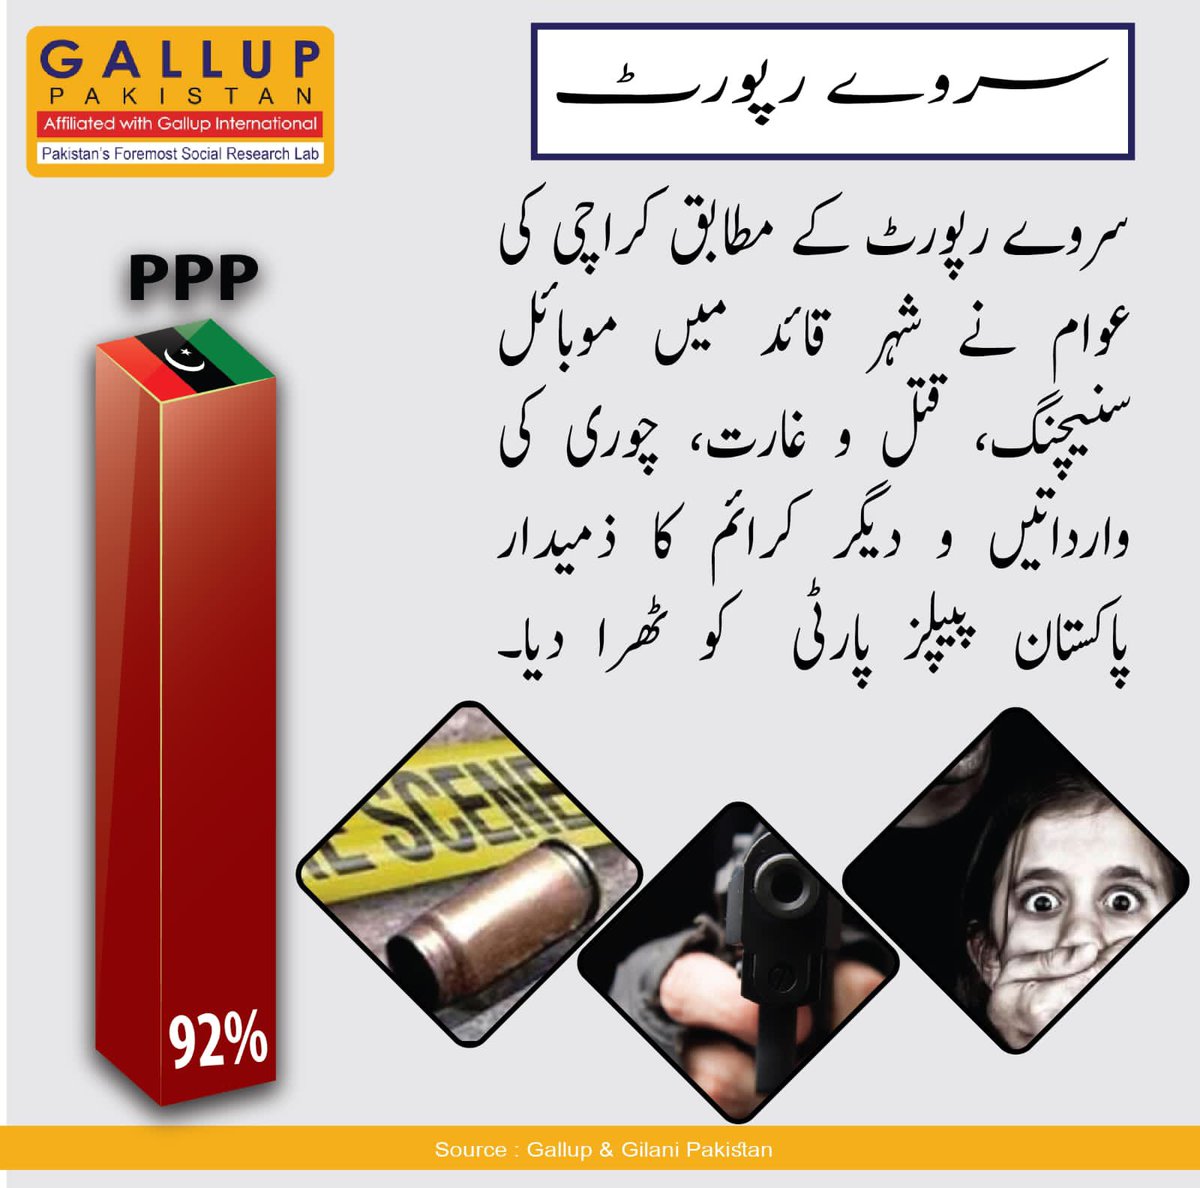 🇵🇰 The Gallup Survey reveals the pulse of Karachi! 80% favor MQM Pakistan, recognizing it as the voice of the people. On 8th Feb 2024, make your voice count. #VotePatangKa